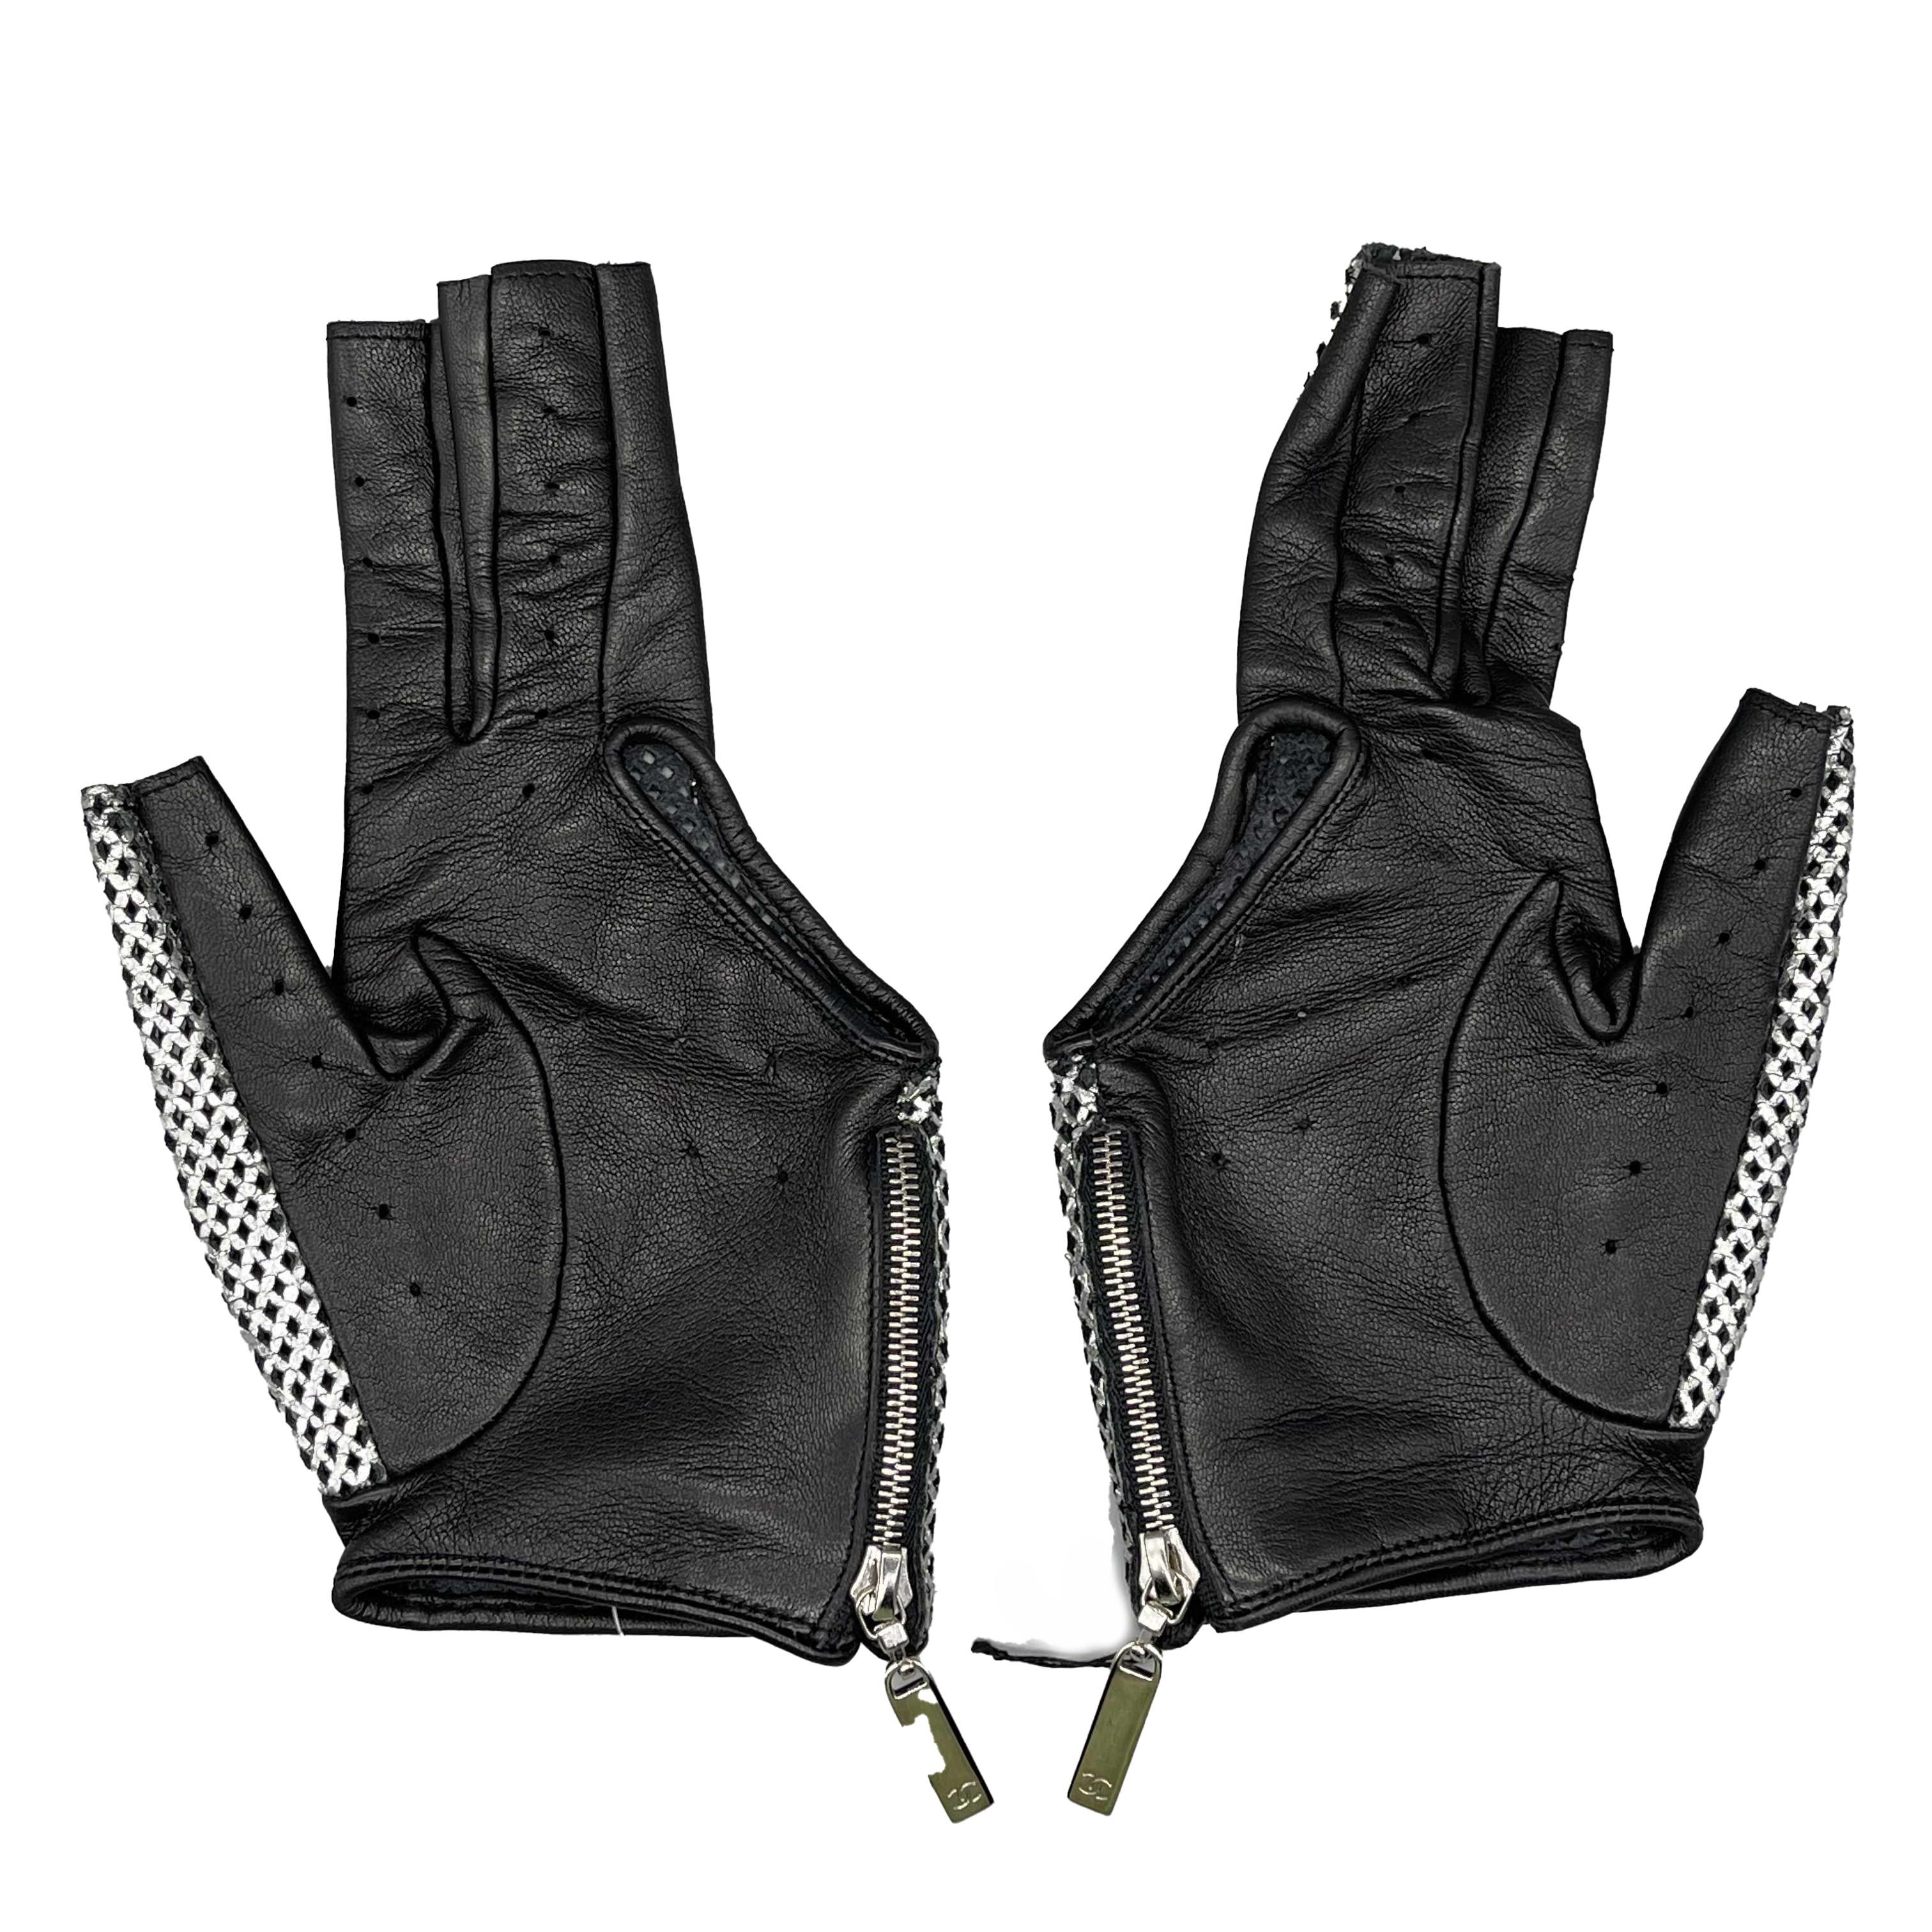 CHANEL - Very Good - 2008 Metallic Silver Mesh Leather Gloves - Metallic Silver, Black, Silver-Toned Hardware - Accessories

Description

From the 2008 Printemps Spring Act 1 Collection.
As seen on celebrities such as Madonna and Rihanna.
These